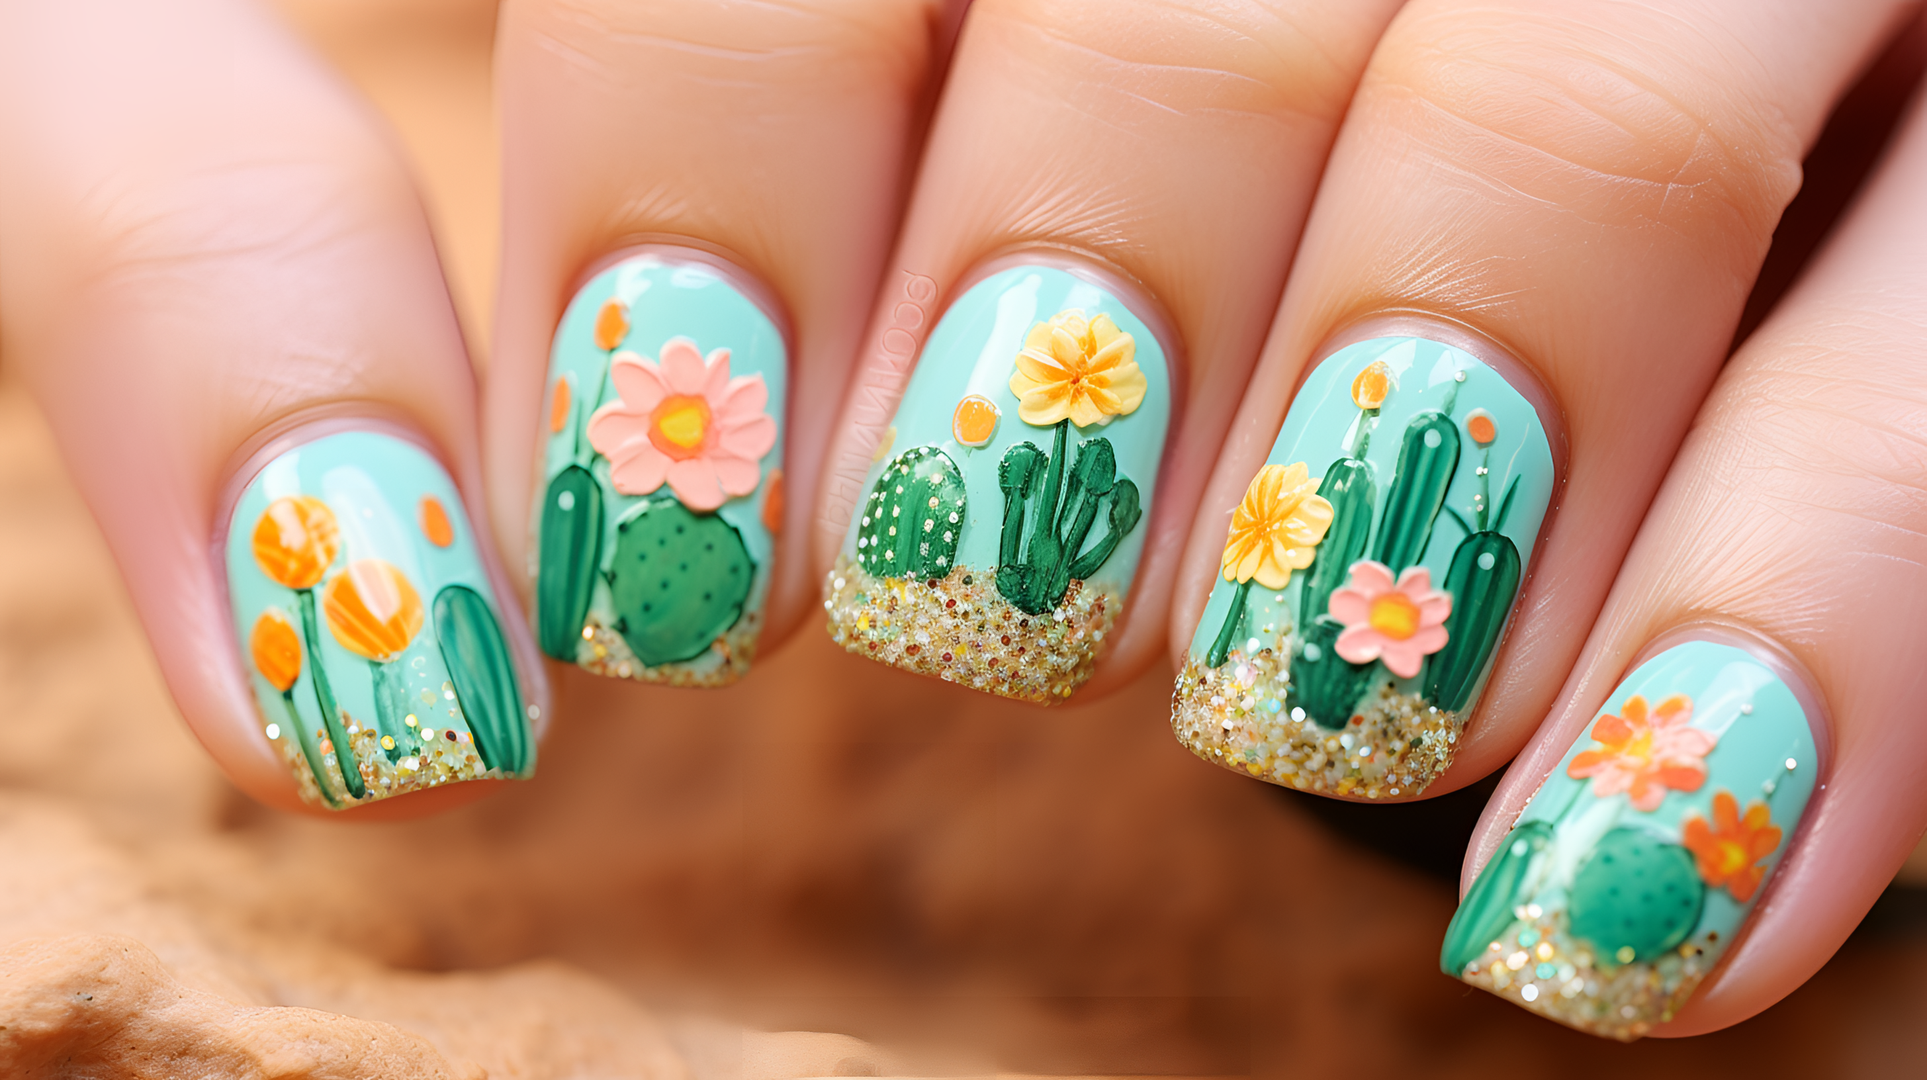 620 Nail Art Stock Videos, Footage, & 4K Video Clips - Getty Images